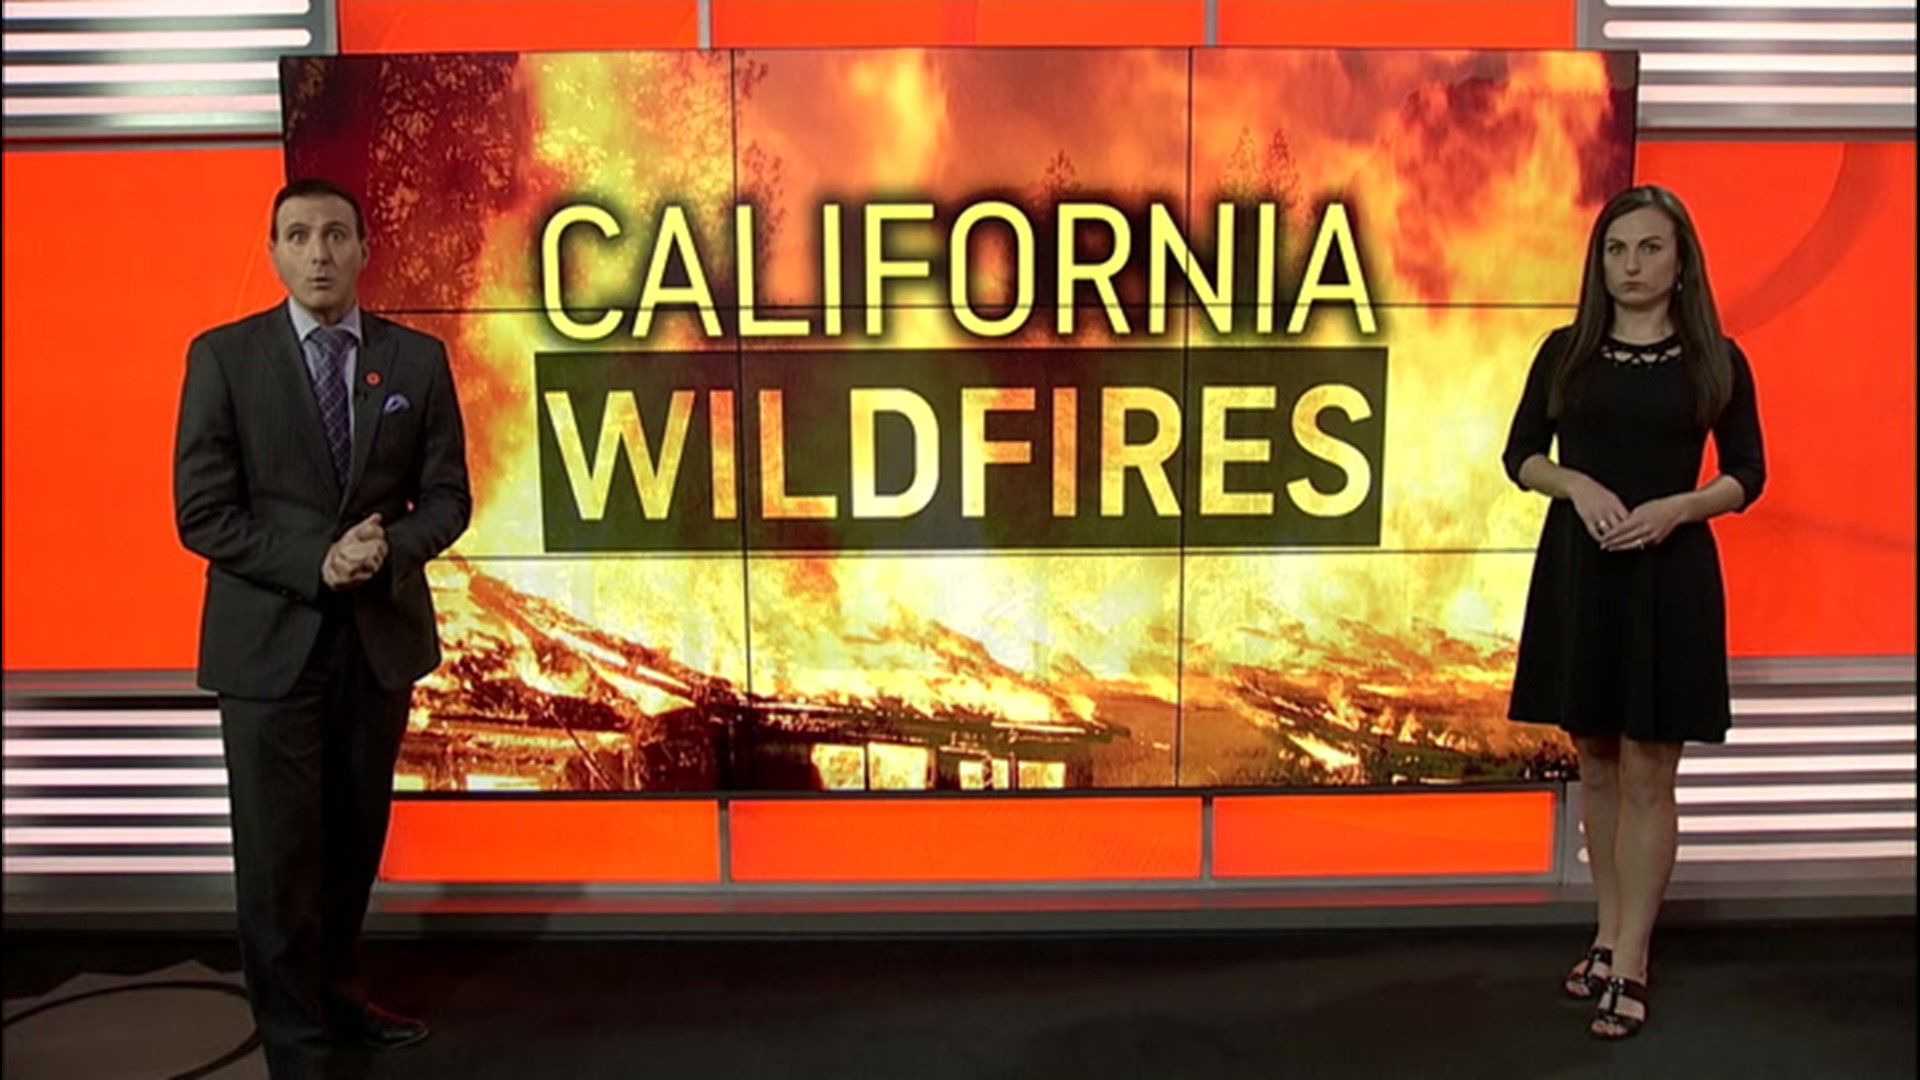 Gusty winds in the weekend forecast is raising the wildfire risk for parts of California. AccuWeather's Bill Wadell has a look at how the vegetation has dried out in Butte County.